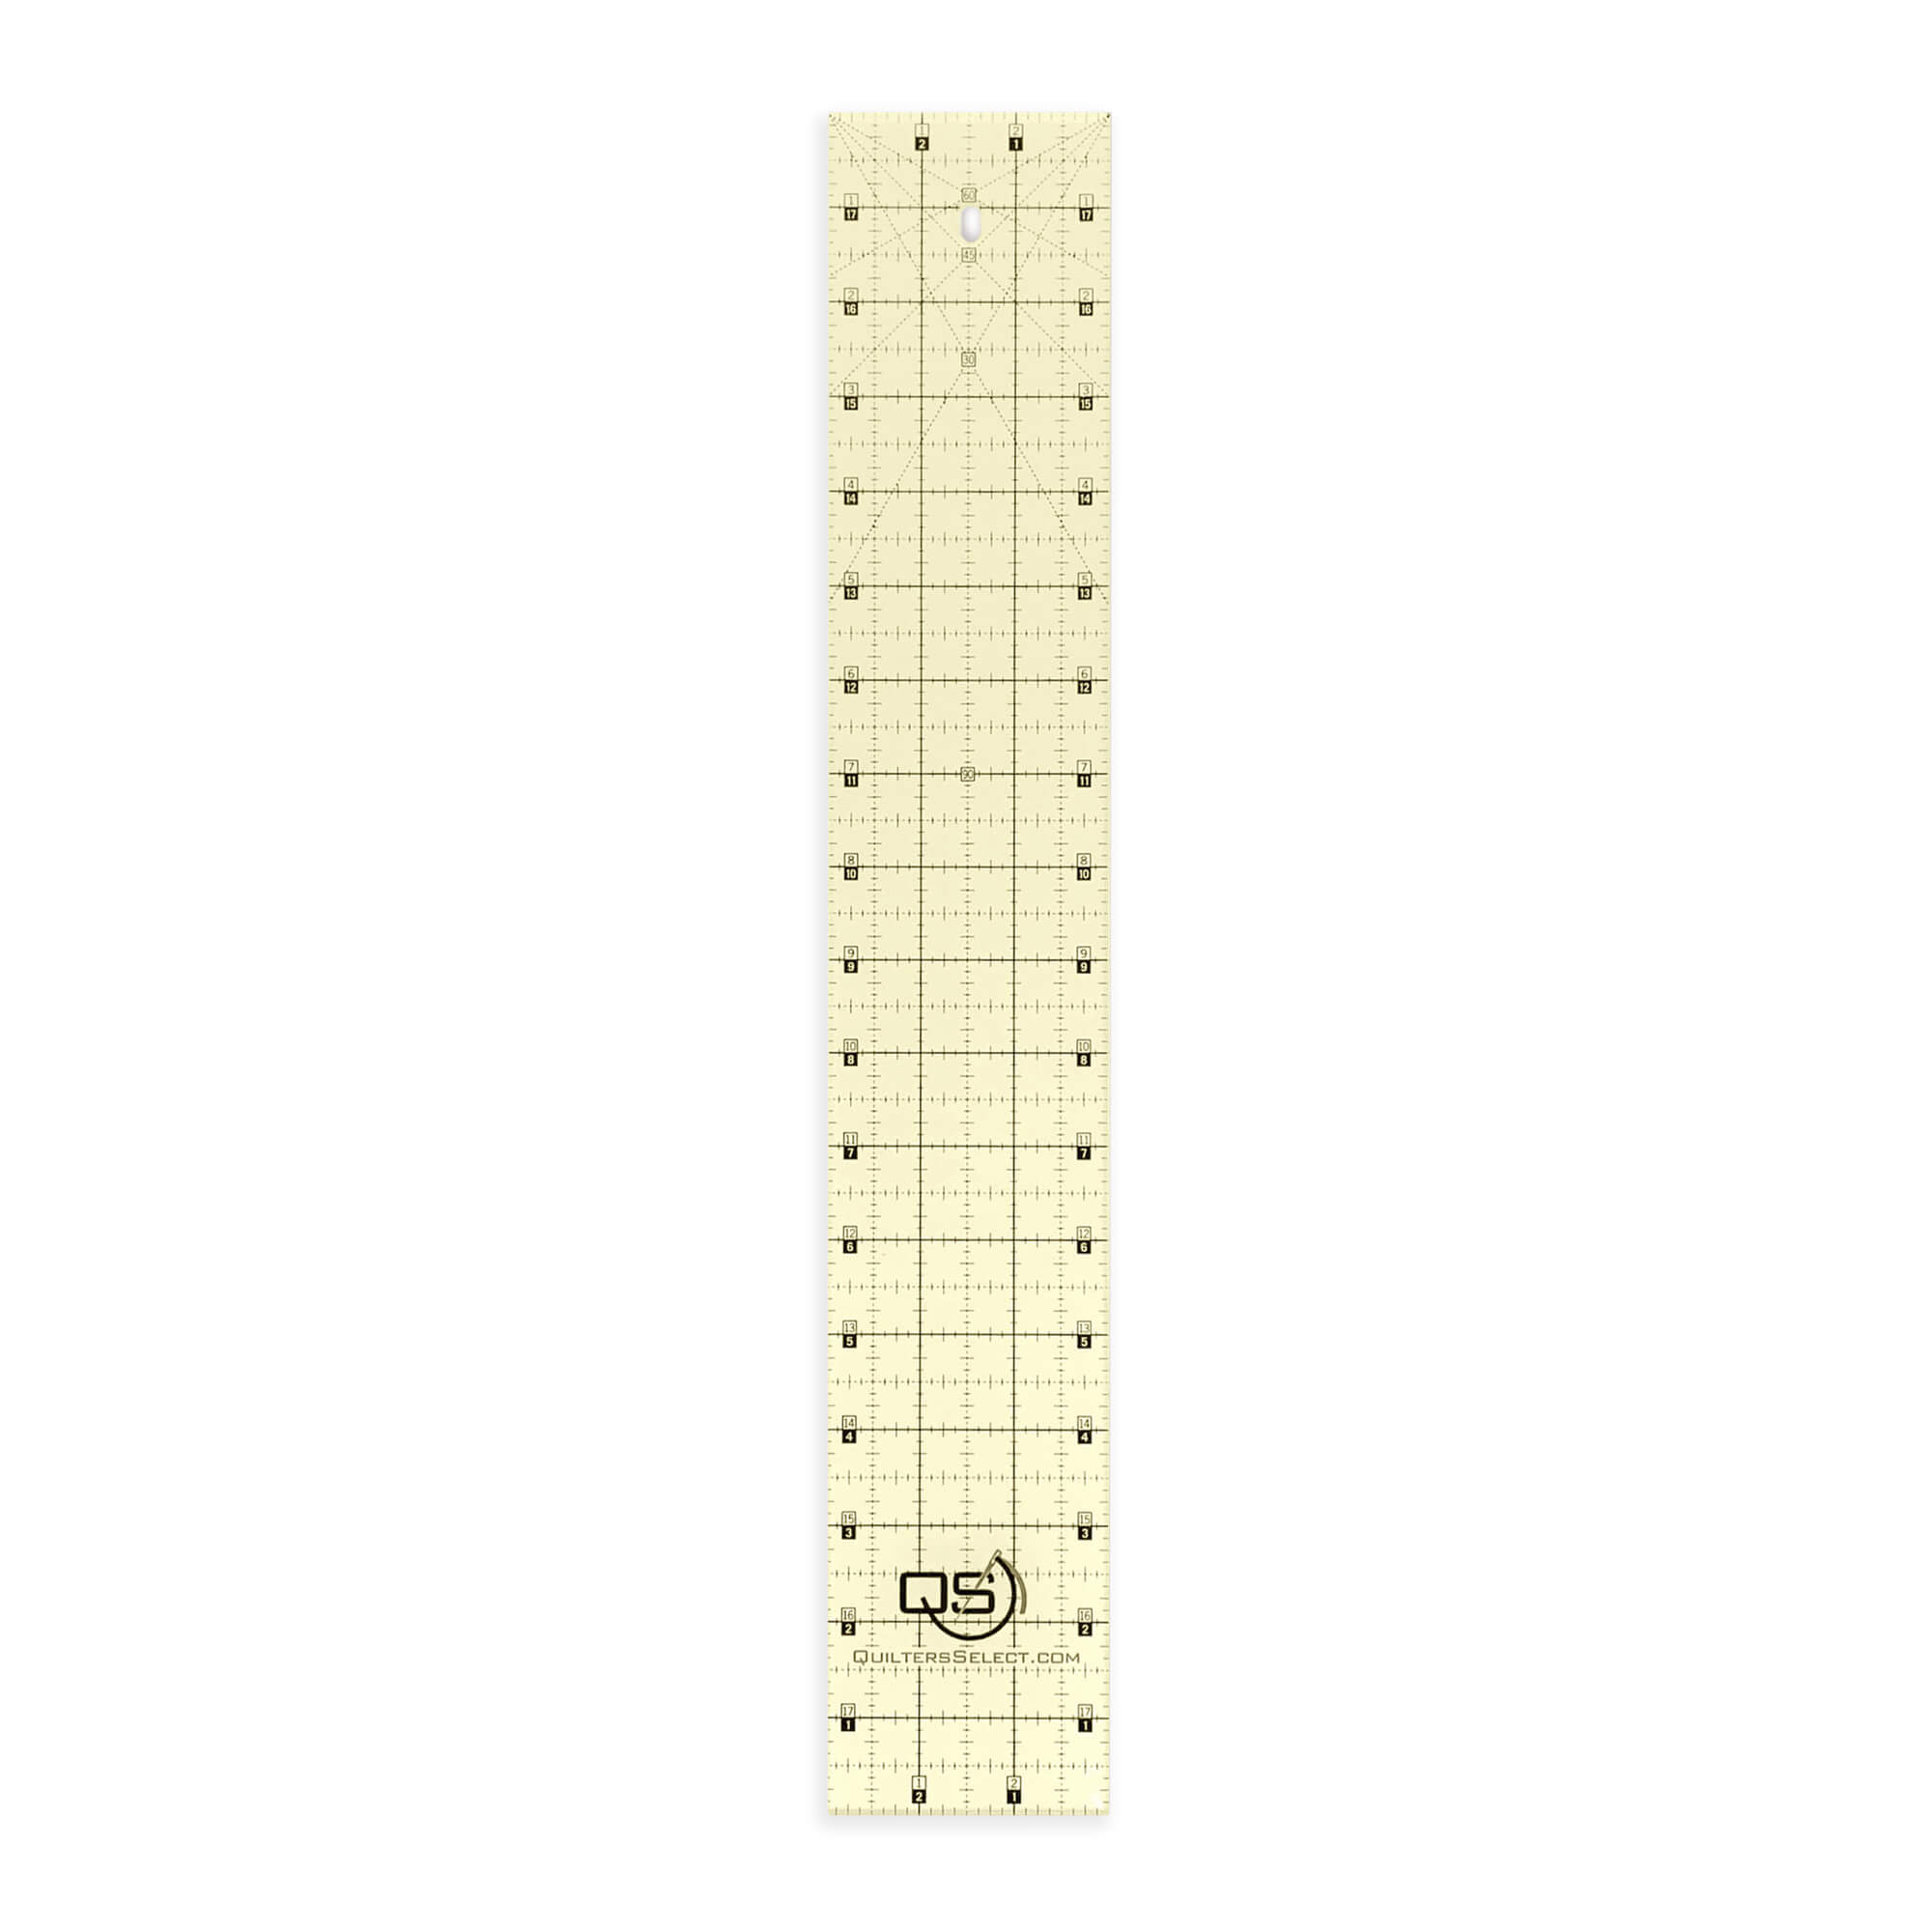 Quilters Select 3n1 Half-Square Combo Ruler - The Sewing Collection